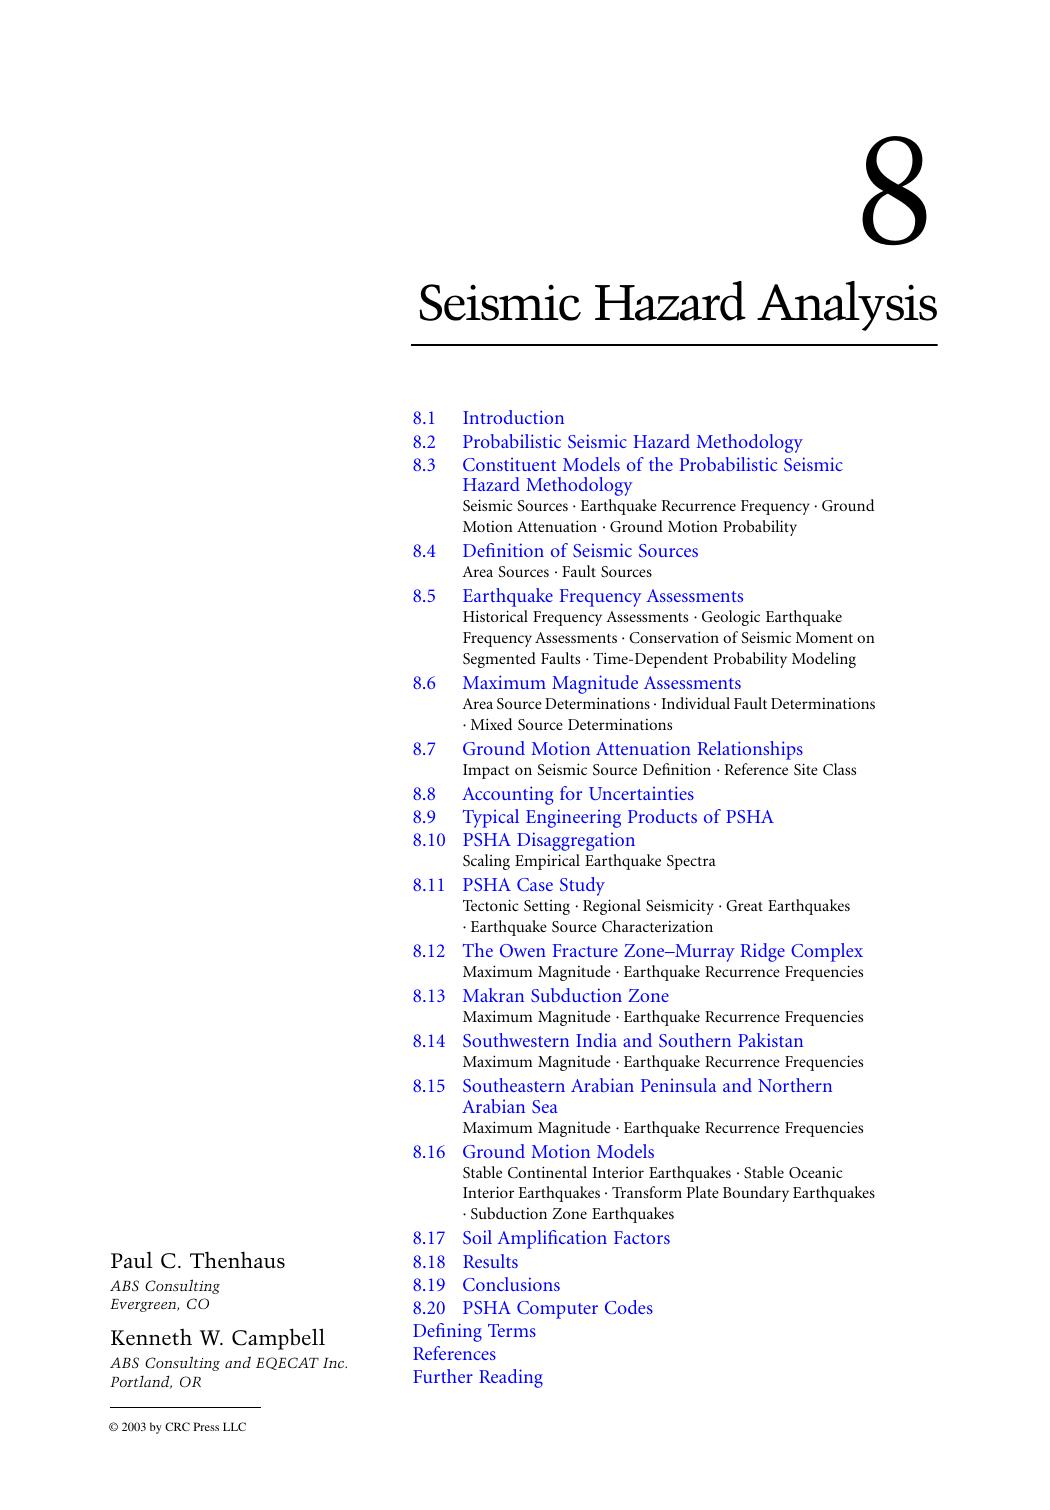 Chapter 8: Seismic Hazard Analysis by Paul C. Thenhaus and Kenneth W. Campbell